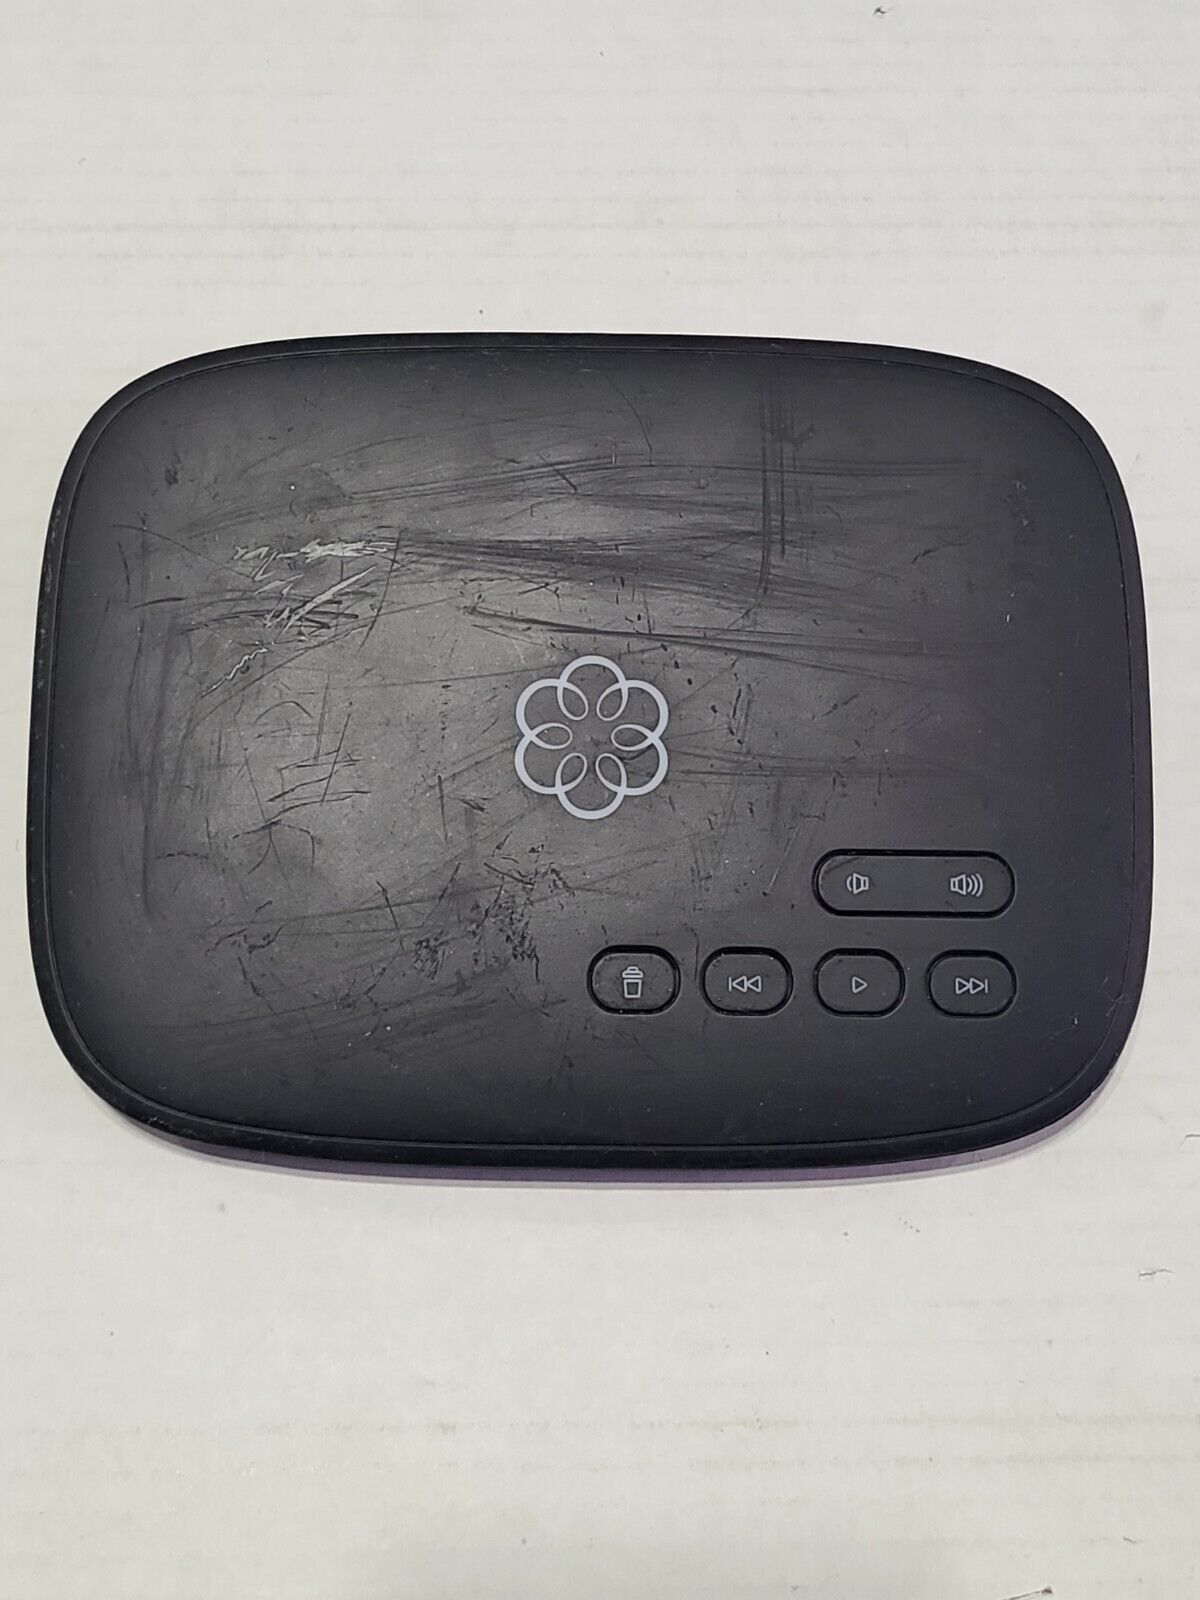 OOMA Telo104 VOIP Telephone Base Unit - No Cables